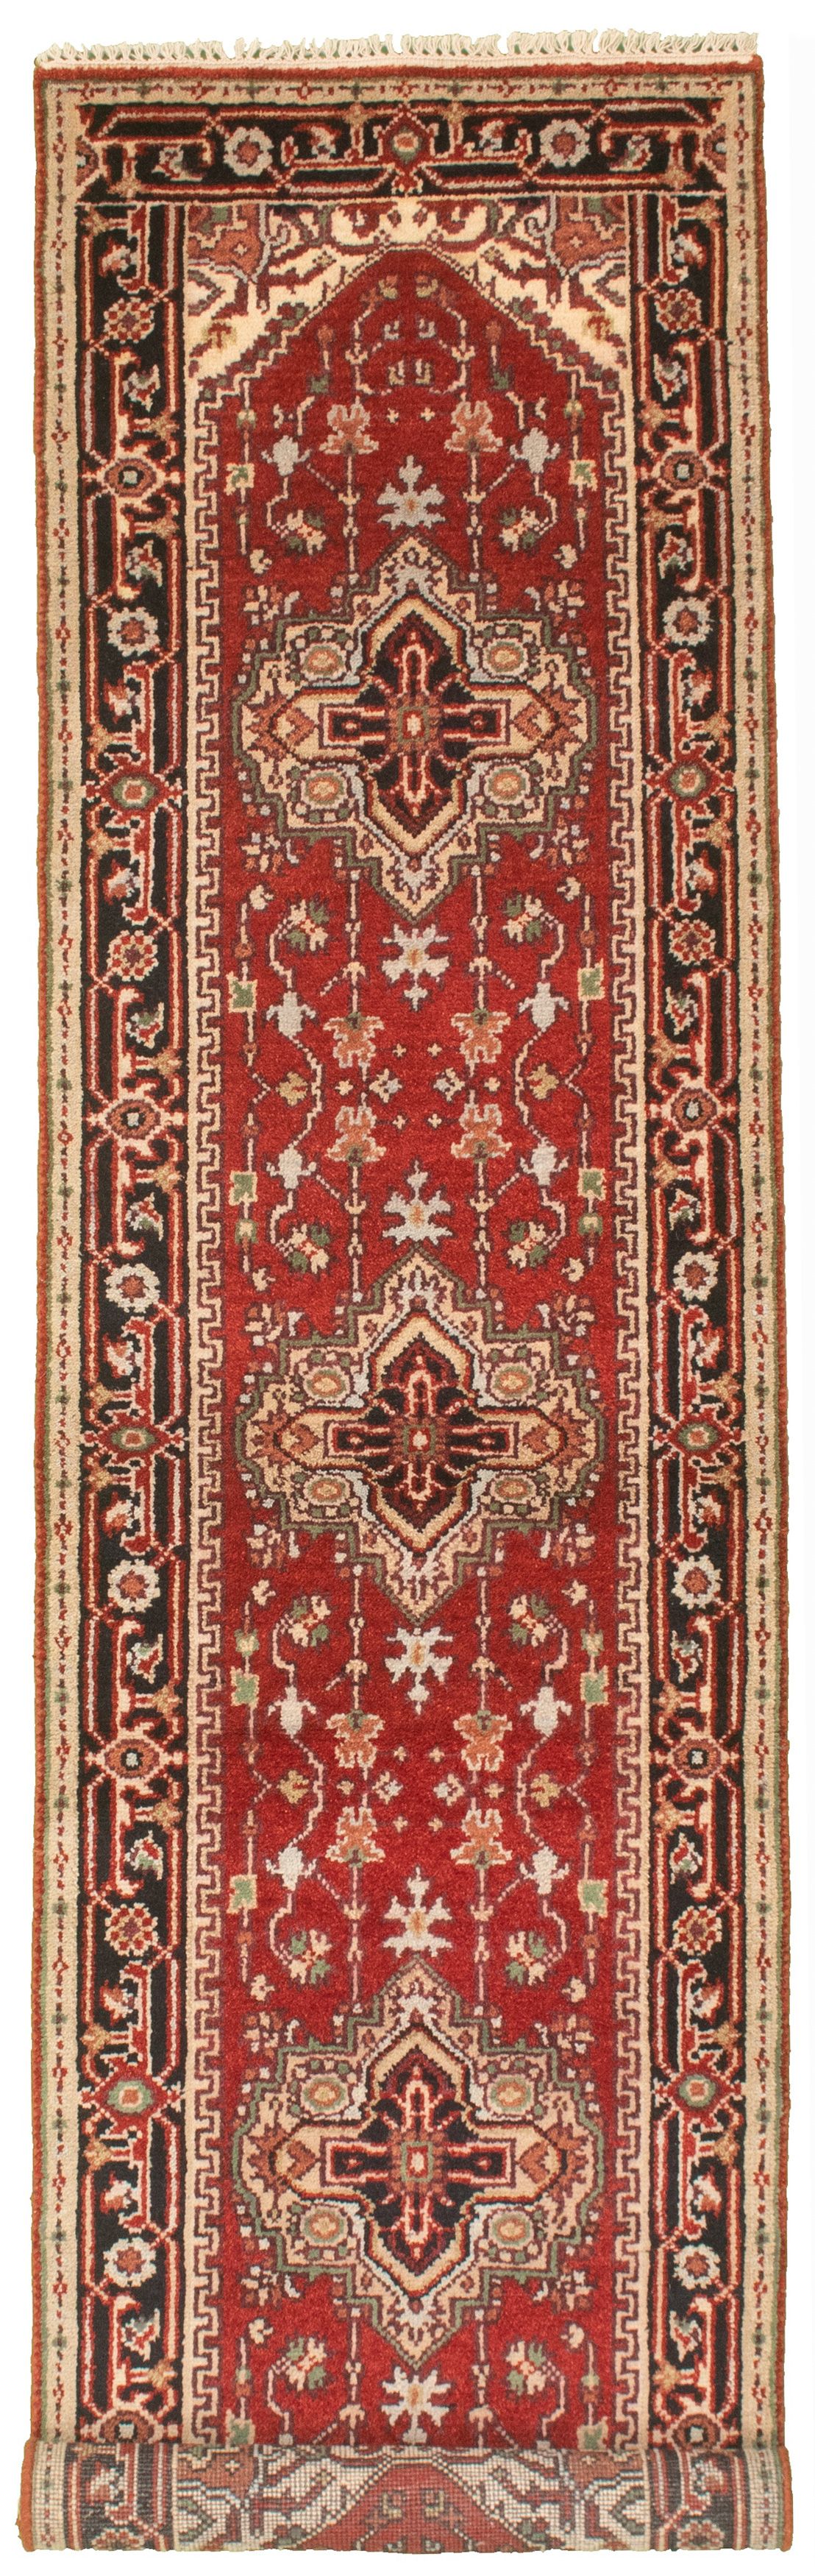 Hand-knotted Serapi Heritage I Red Wool Rug 2'7" x 10'0" Size: 2'7" x 10'0"  